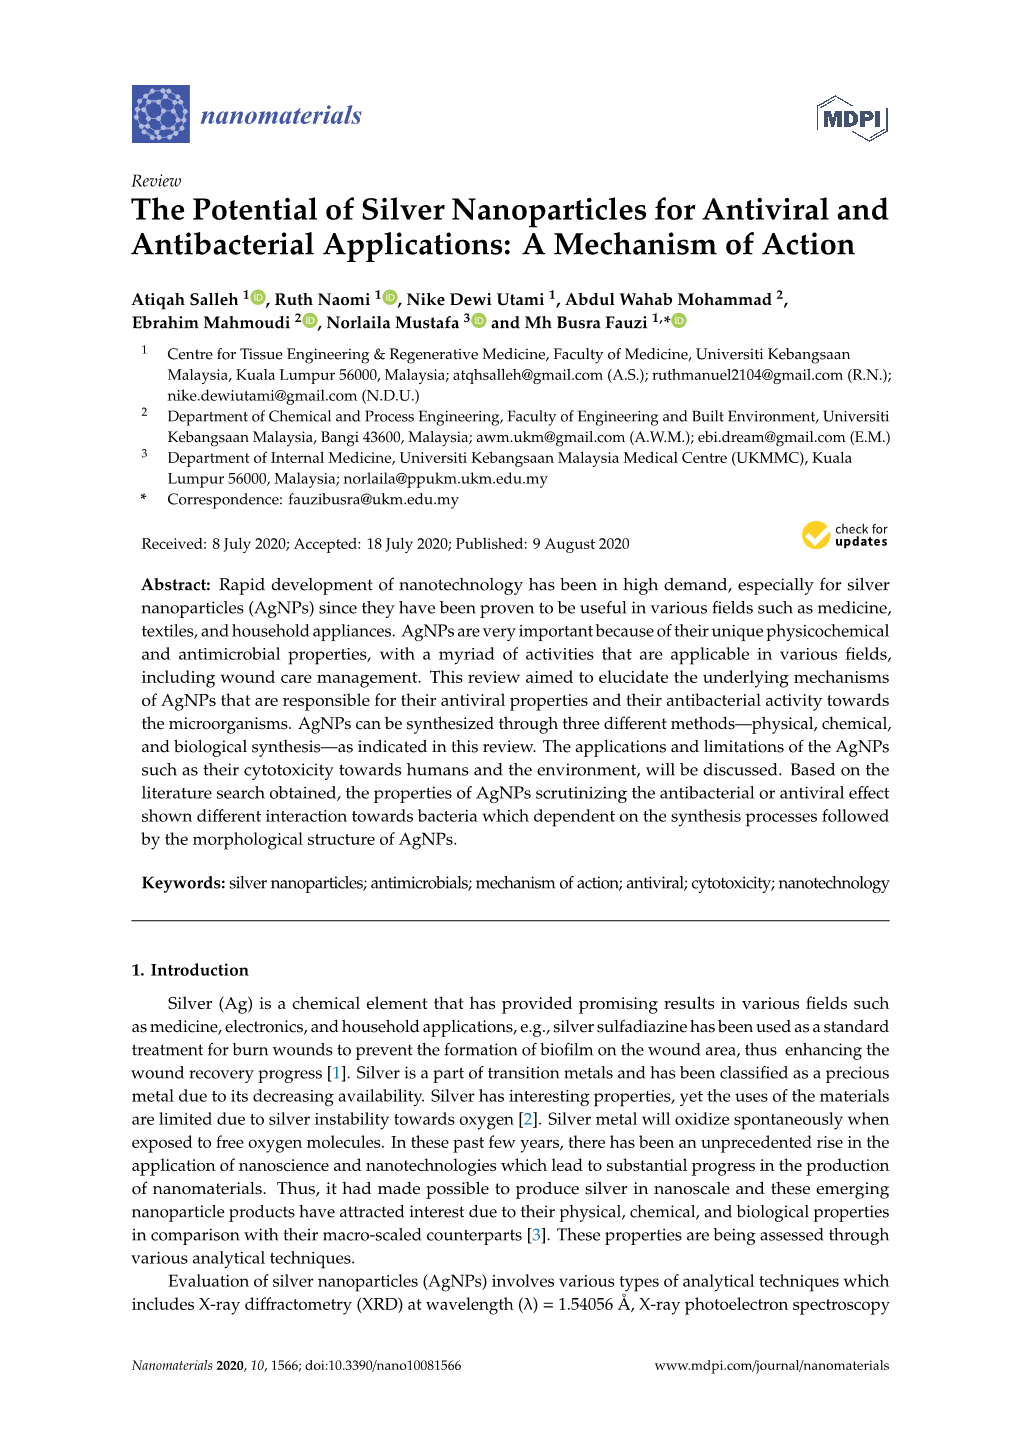 The Potential of Silver Nanoparticles for Antiviral and Antibacterial Applications: a Mechanism of Action